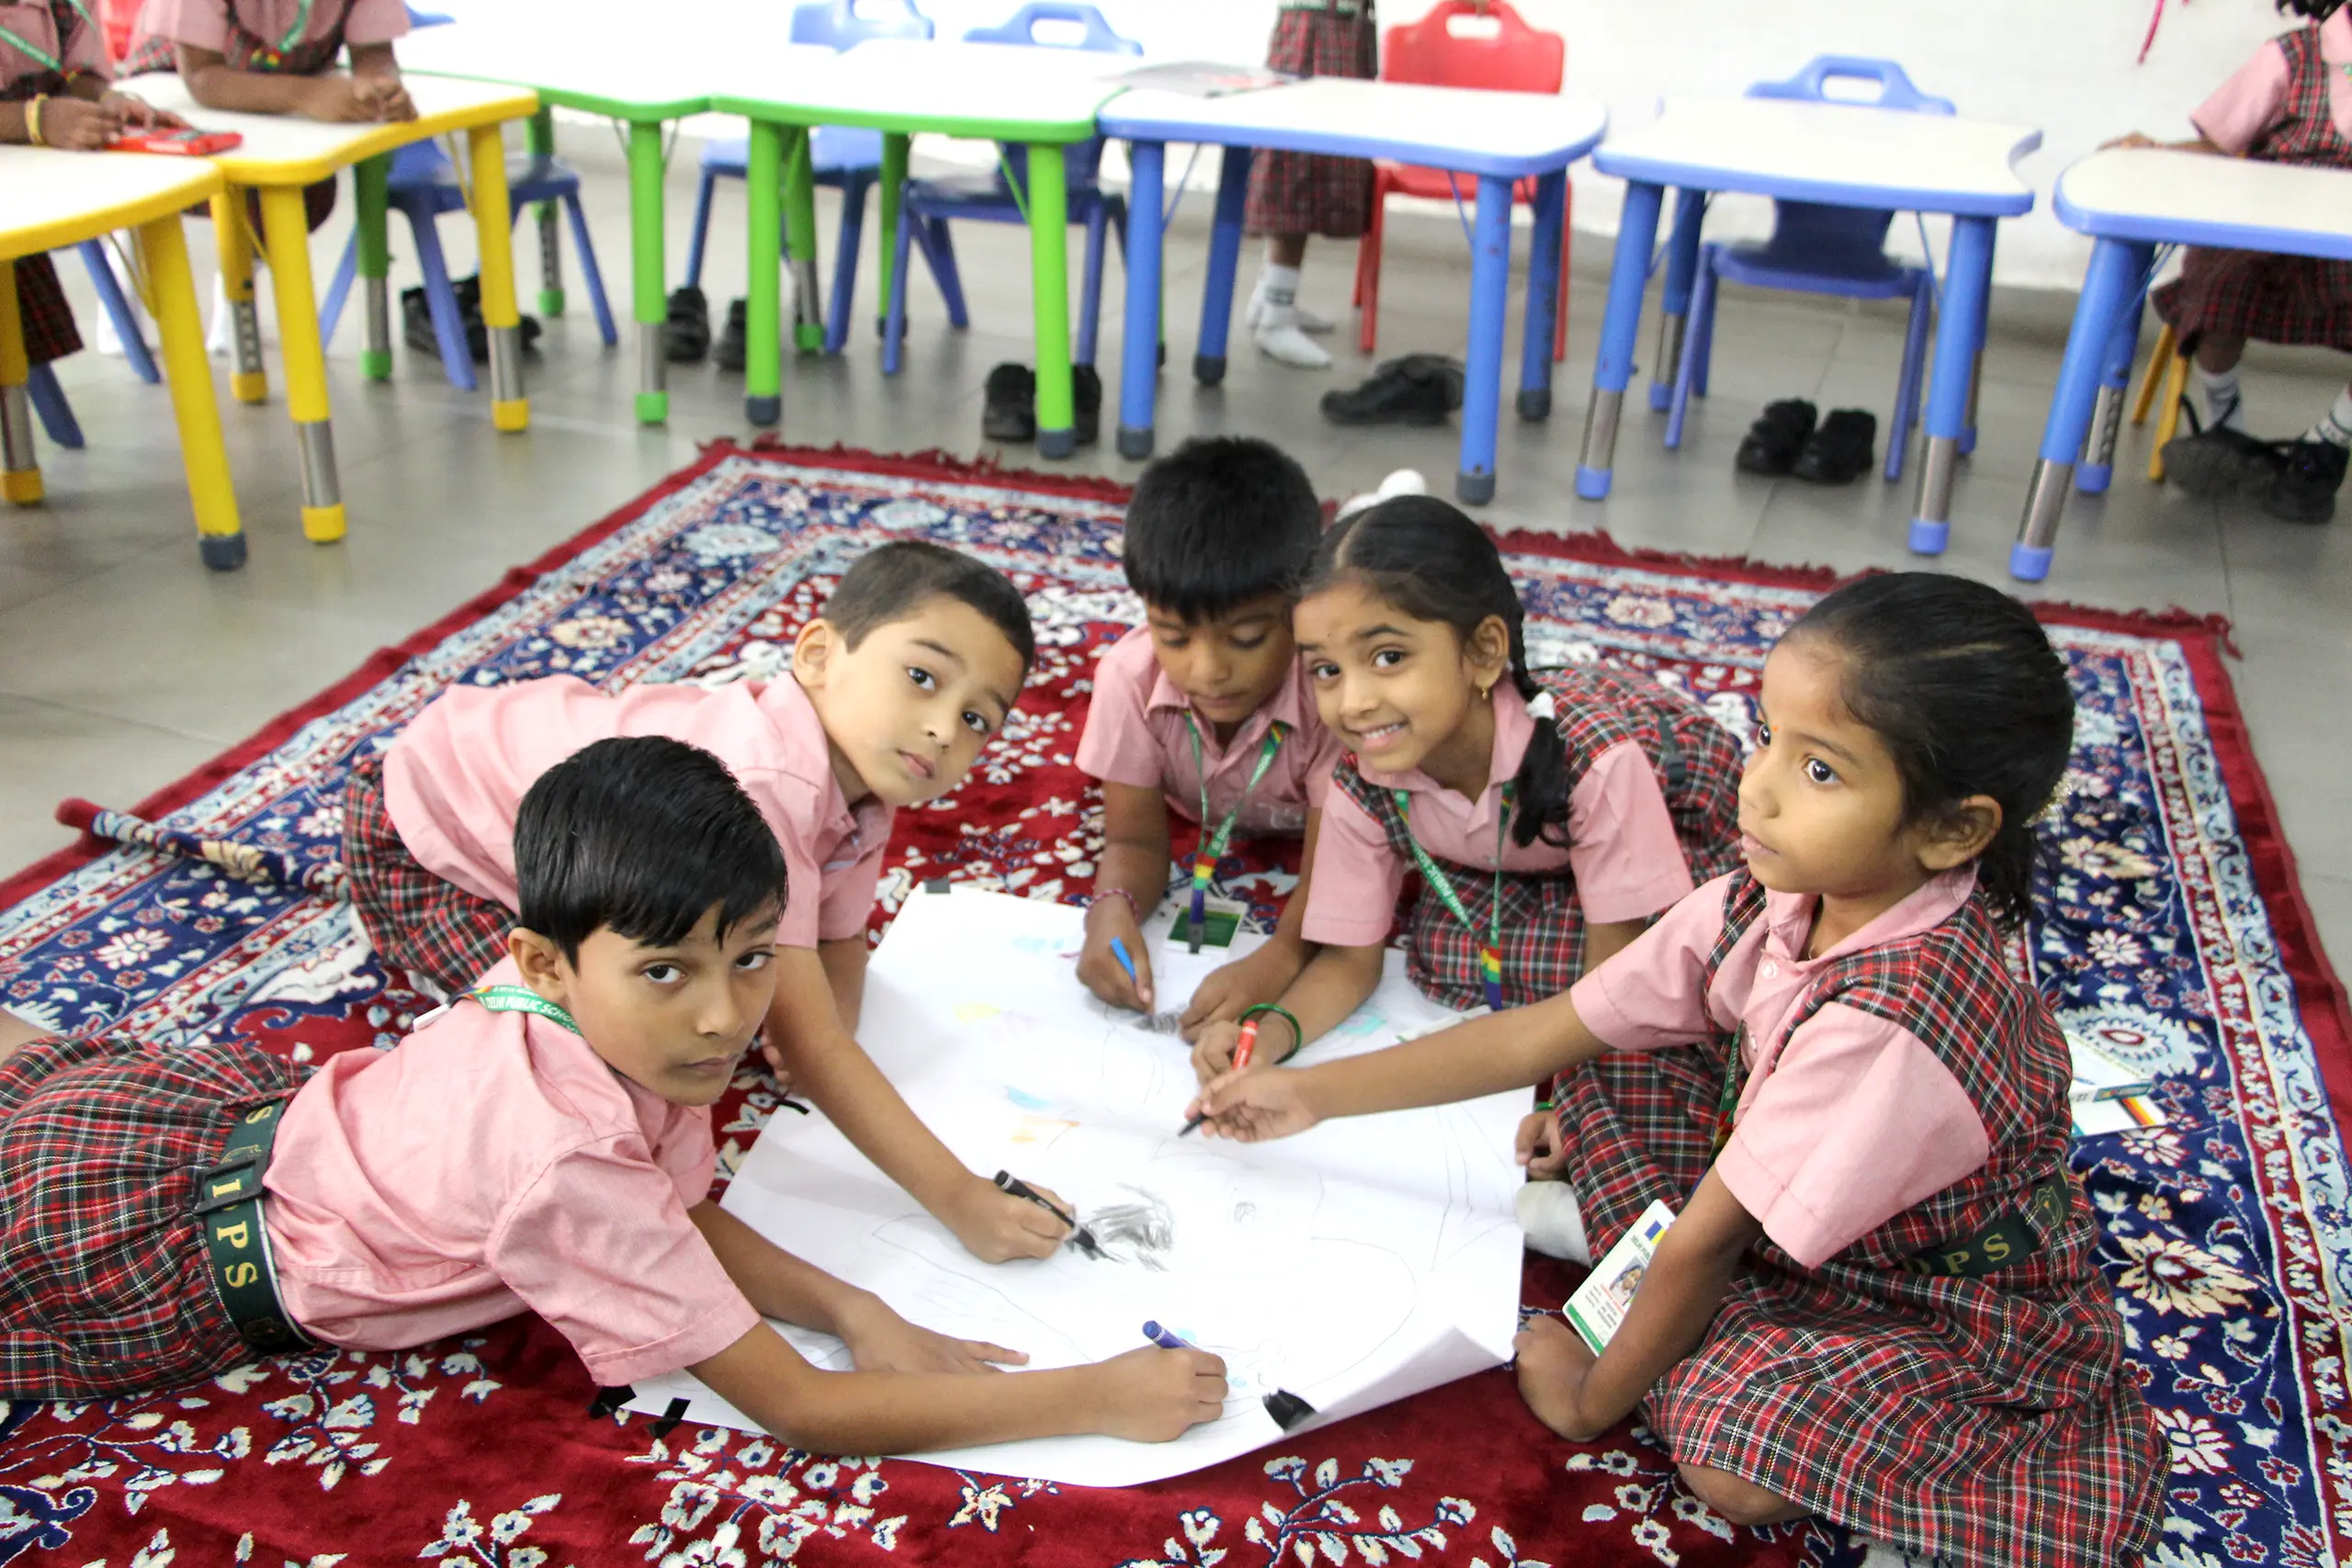 Students participating in group in arts and crafts activity at DPS Warangal.